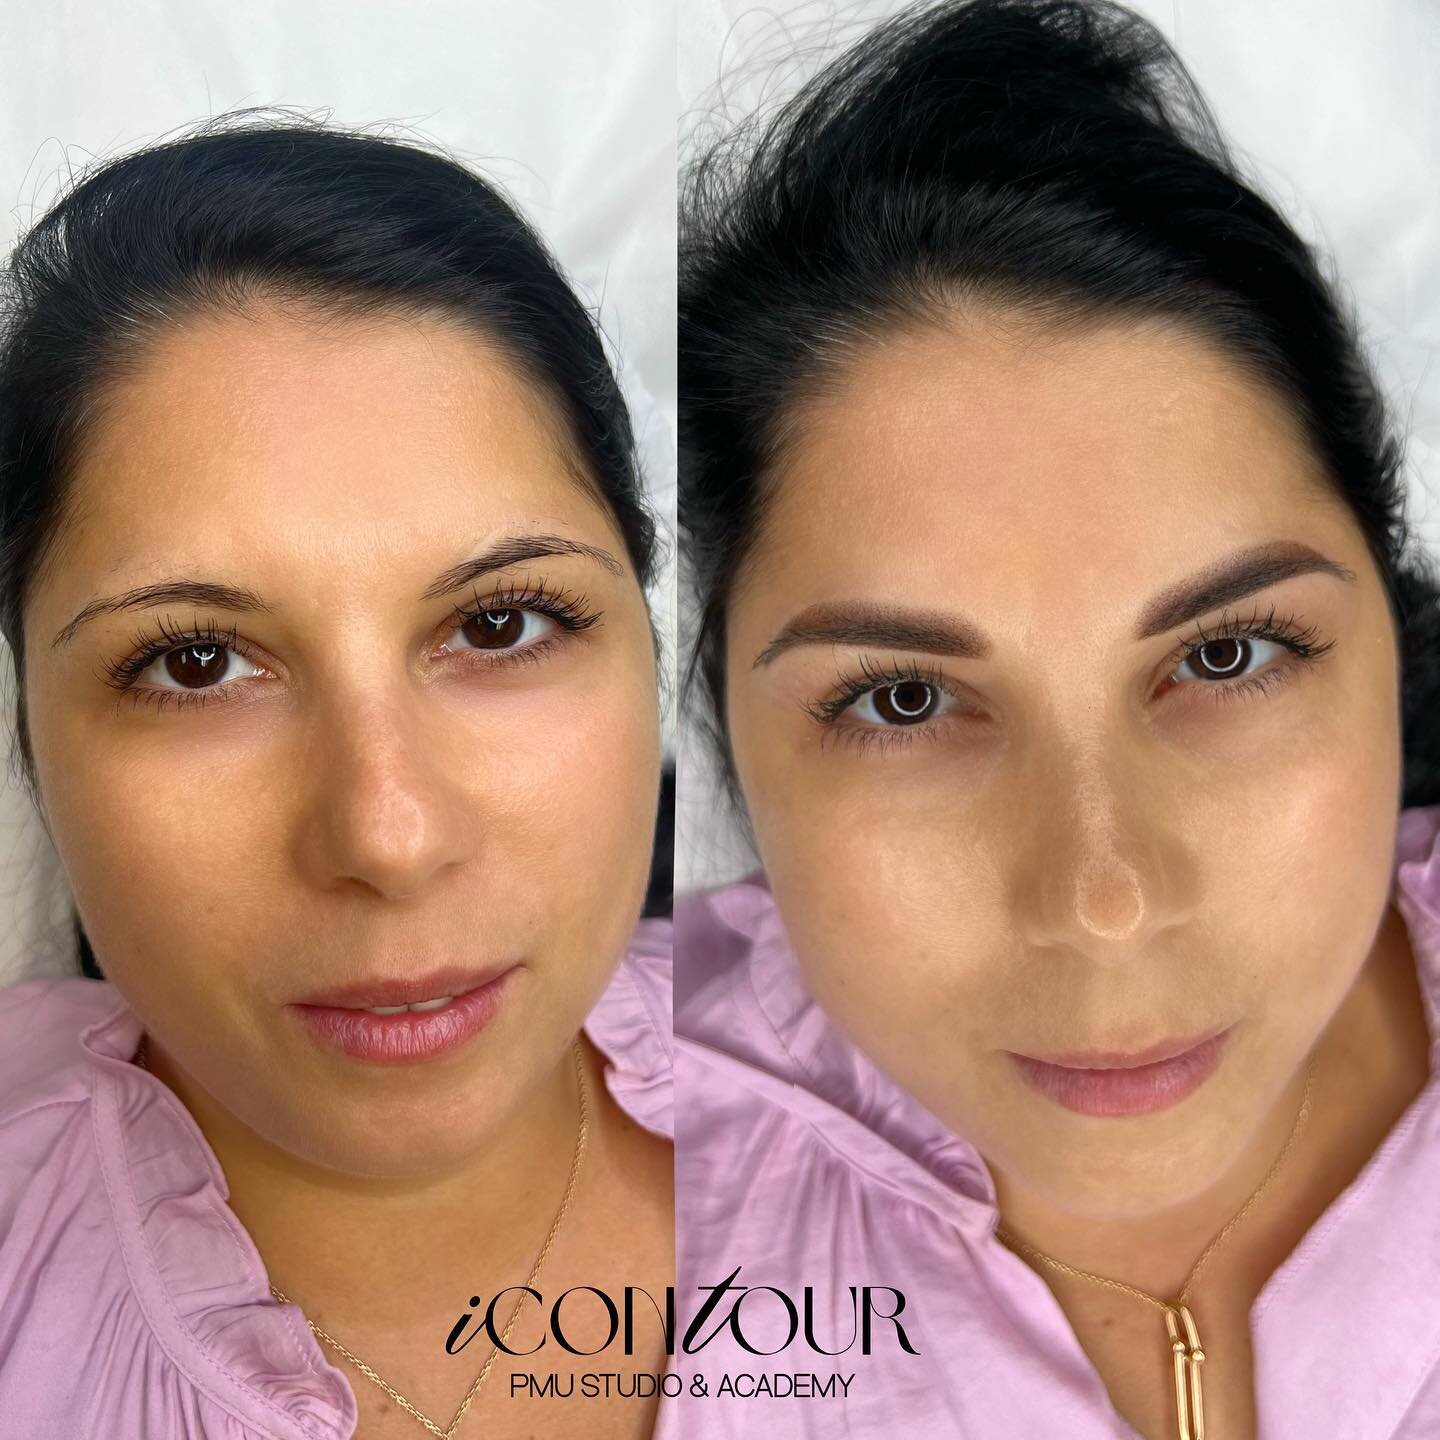 Before and after transformation Powder Brows 🔥

🕐Time of procedure: 2
hours
❗️Pain: none or minimum 
✅Last up to 2 years 
👌🏼Perfect for ladies who wants super natural effect

Pigments: @lipigmentsusa 
Machine: @microbeauofficial Flux S
Cartridge: